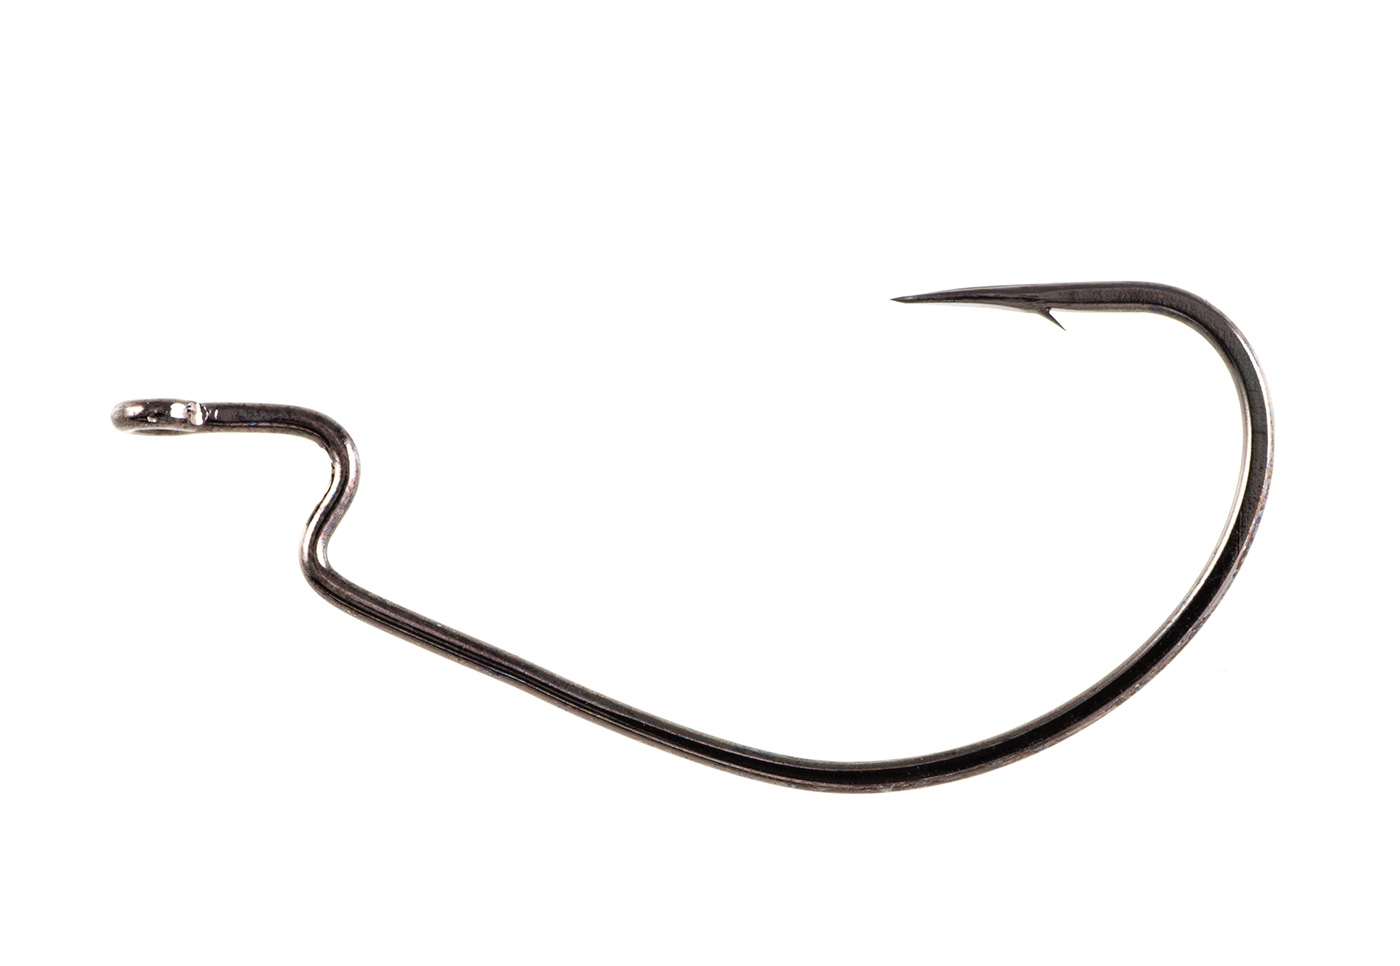 Owner Hooks Bass J Hook with Cutting Point, Z Bend Worm